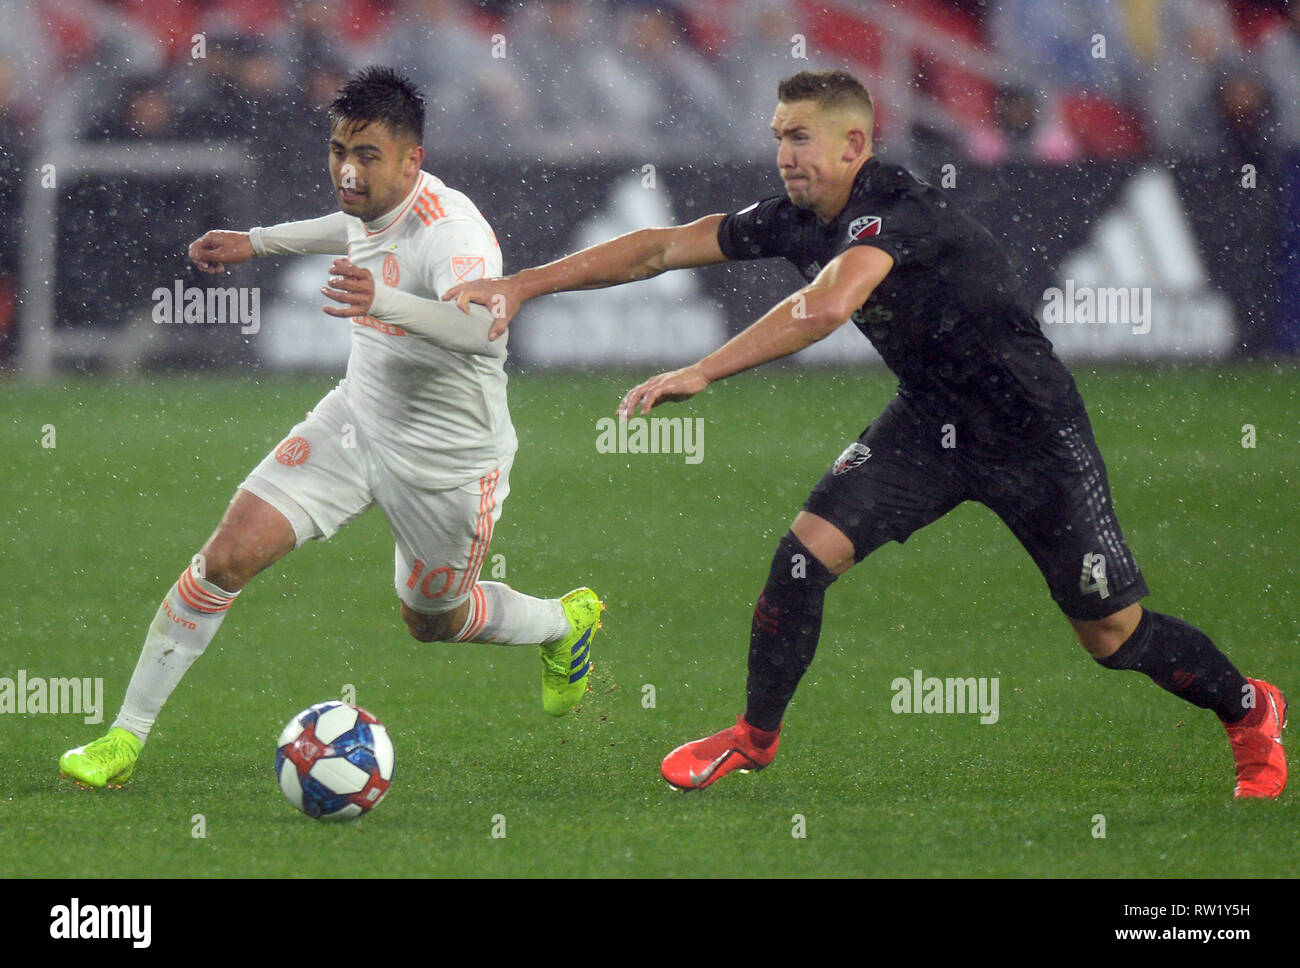 Washington, DC, USA. 3rd Mar, 2019. 20190303 - Atlanta United FC midfielder MIGUEL ALMIRON (10) swings the ball around D.C. United midfielder RUSSELL CANOUSE (4) during a steady rain in the second half at Audi Field in Washington. Credit: Chuck Myers/ZUMA Wire/Alamy Live News Stock Photo